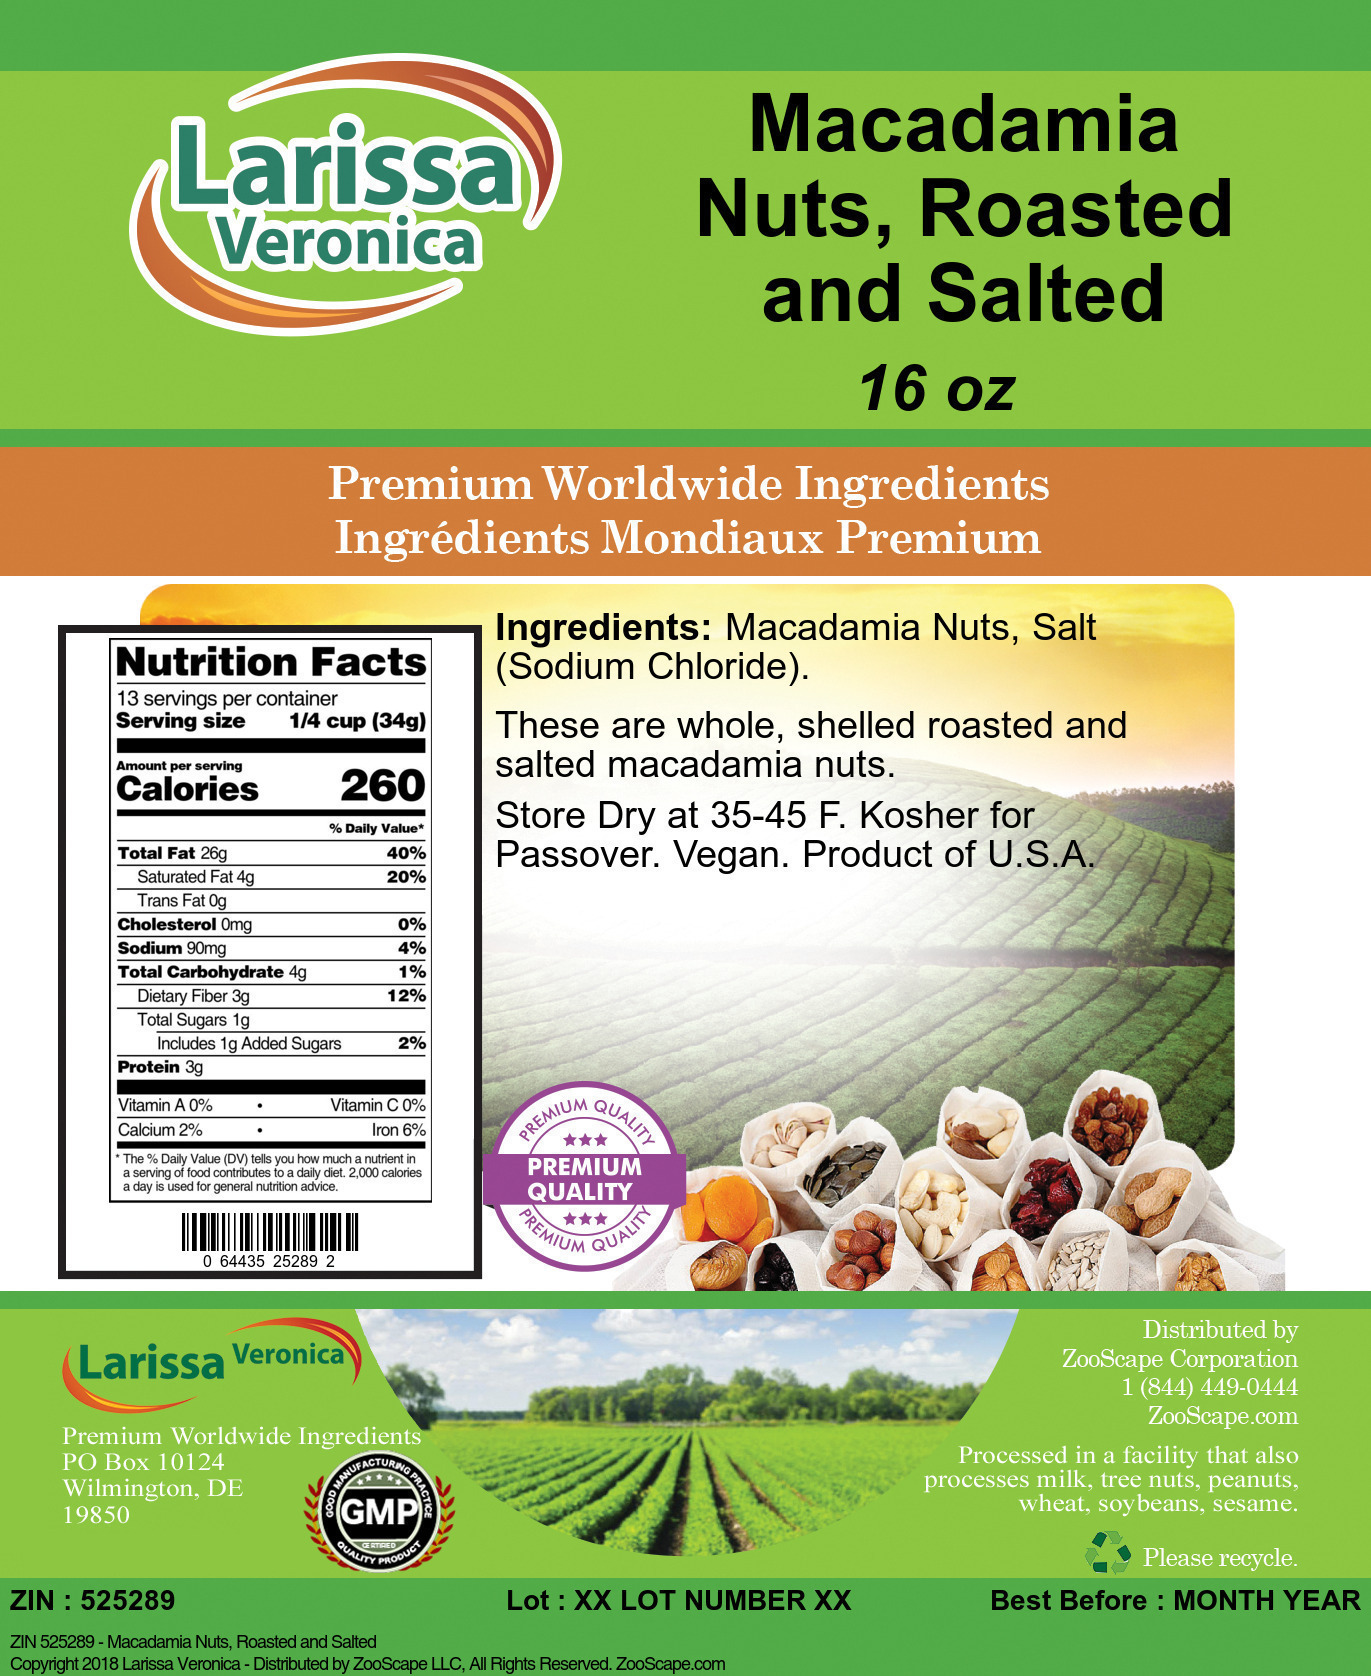 Macadamia Nuts, Roasted and Salted - Label